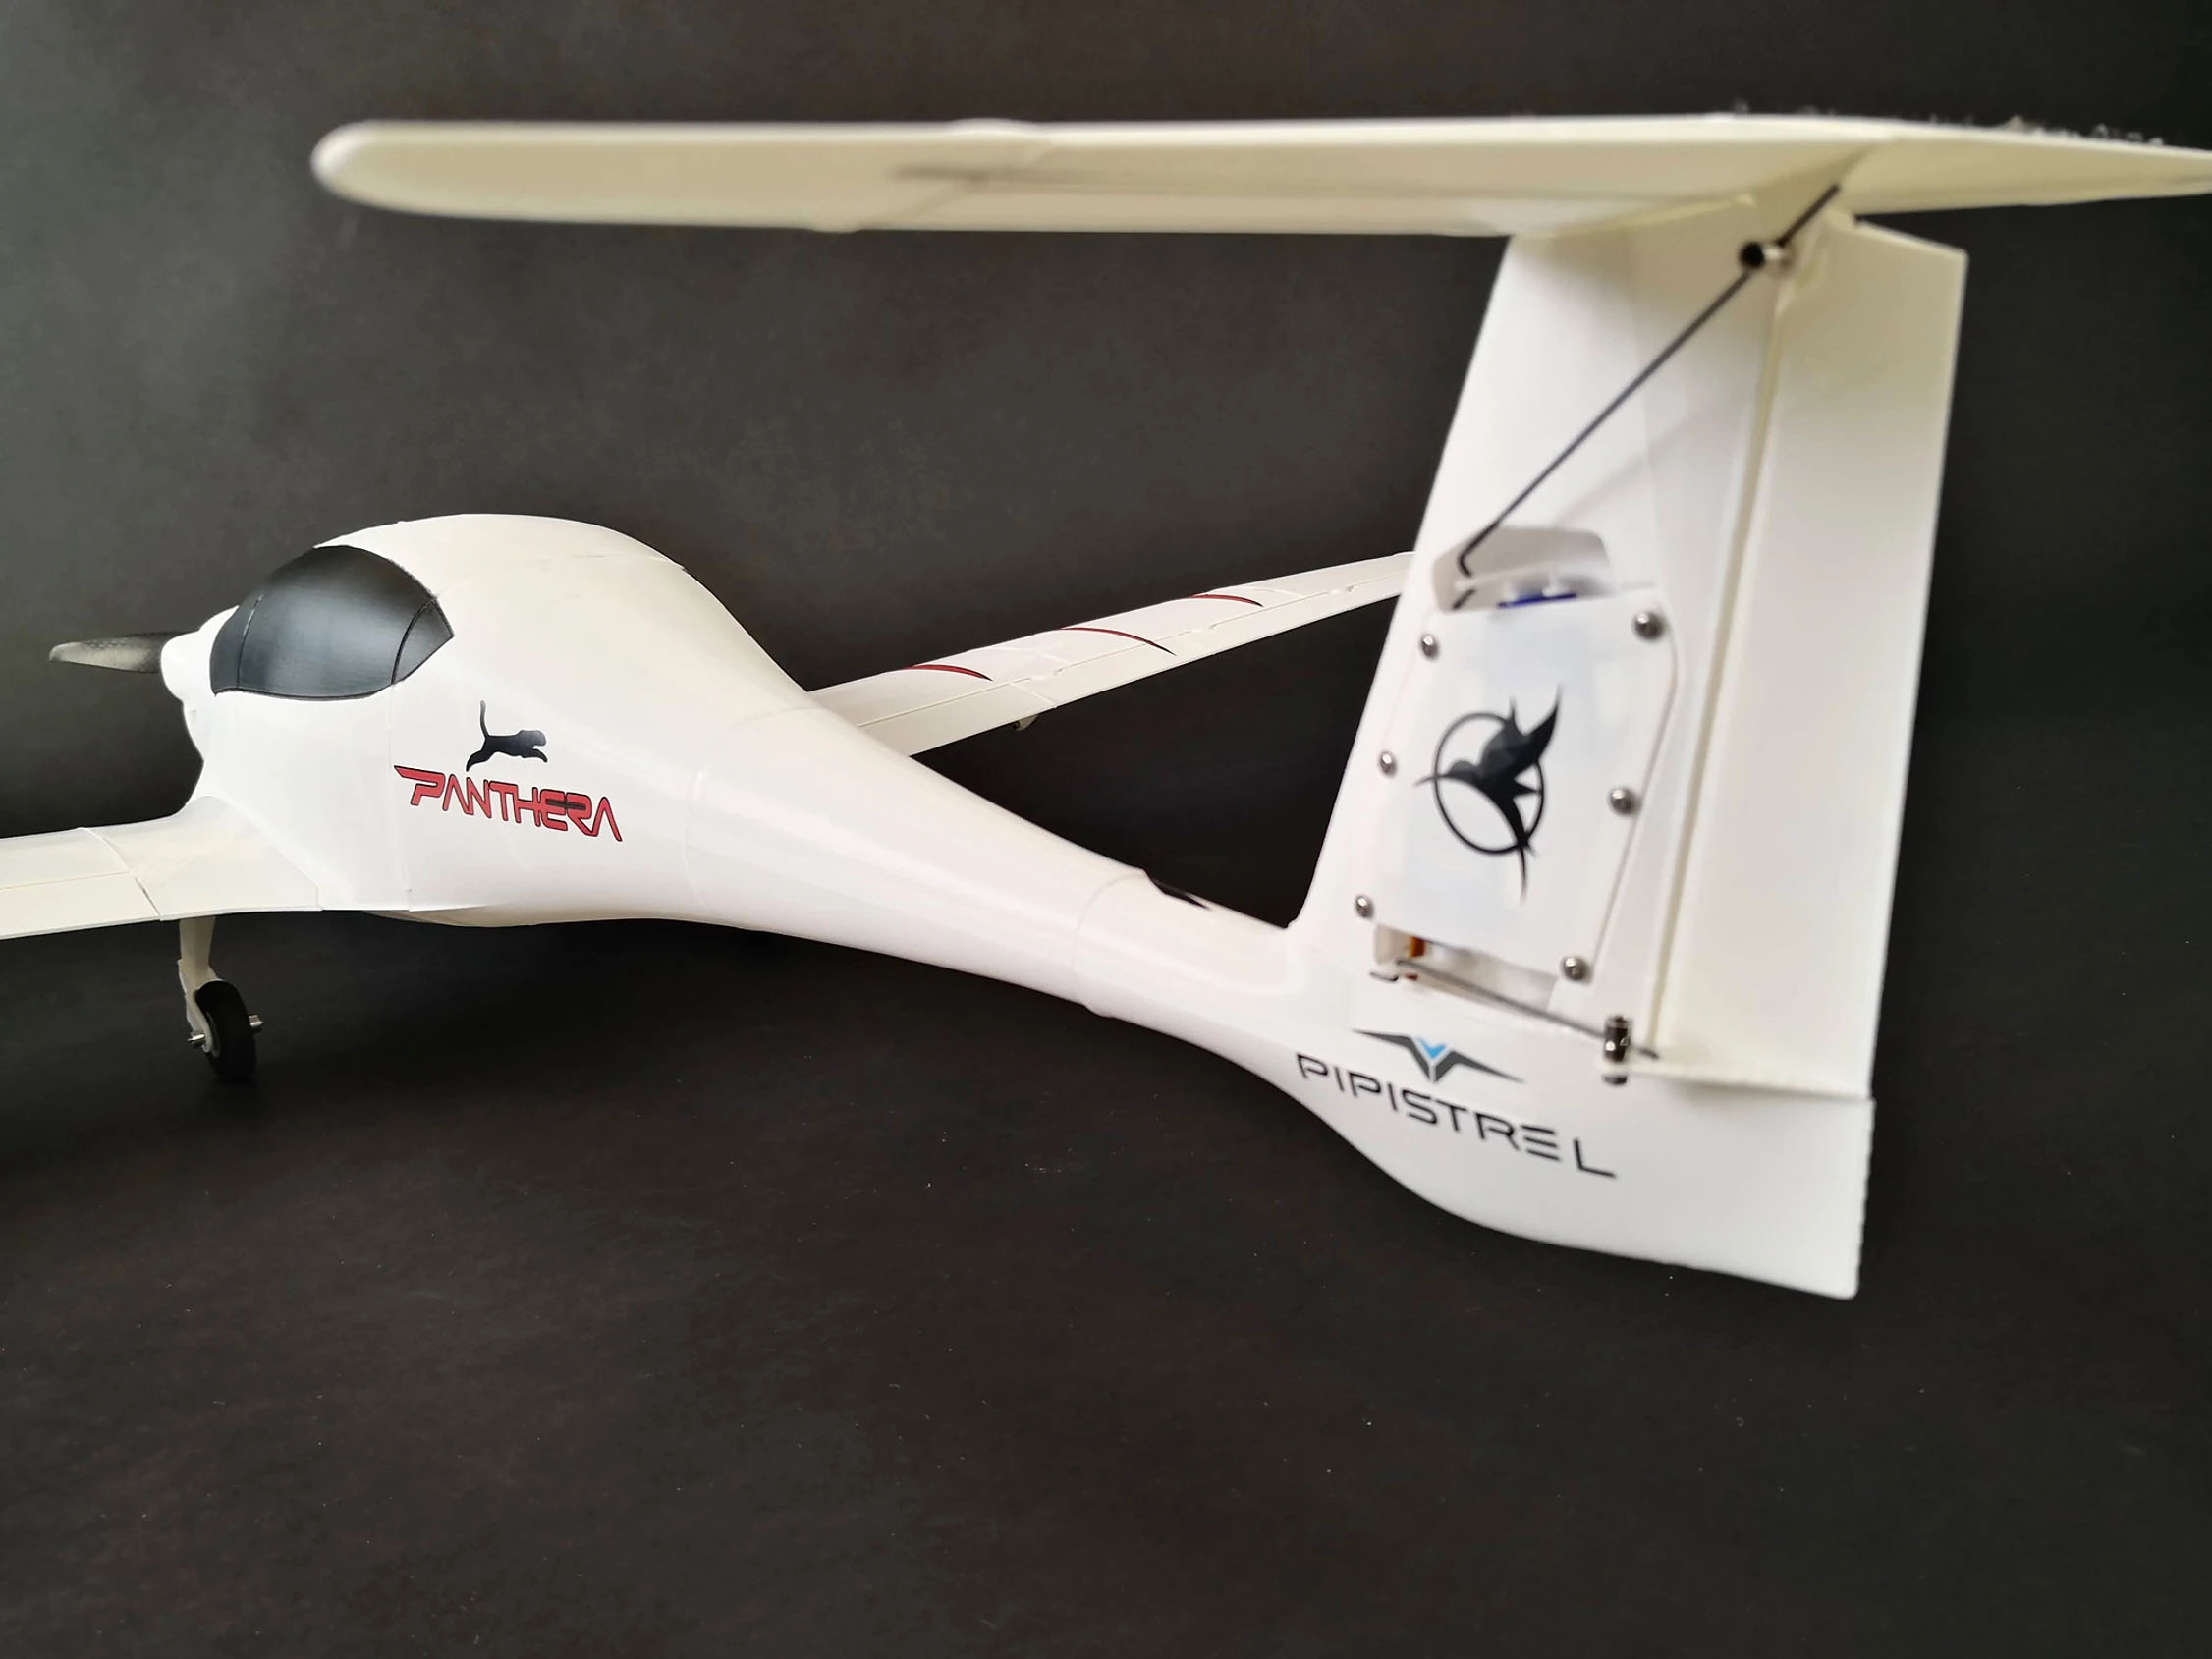 Panthera V2 Eclipson Airplanes